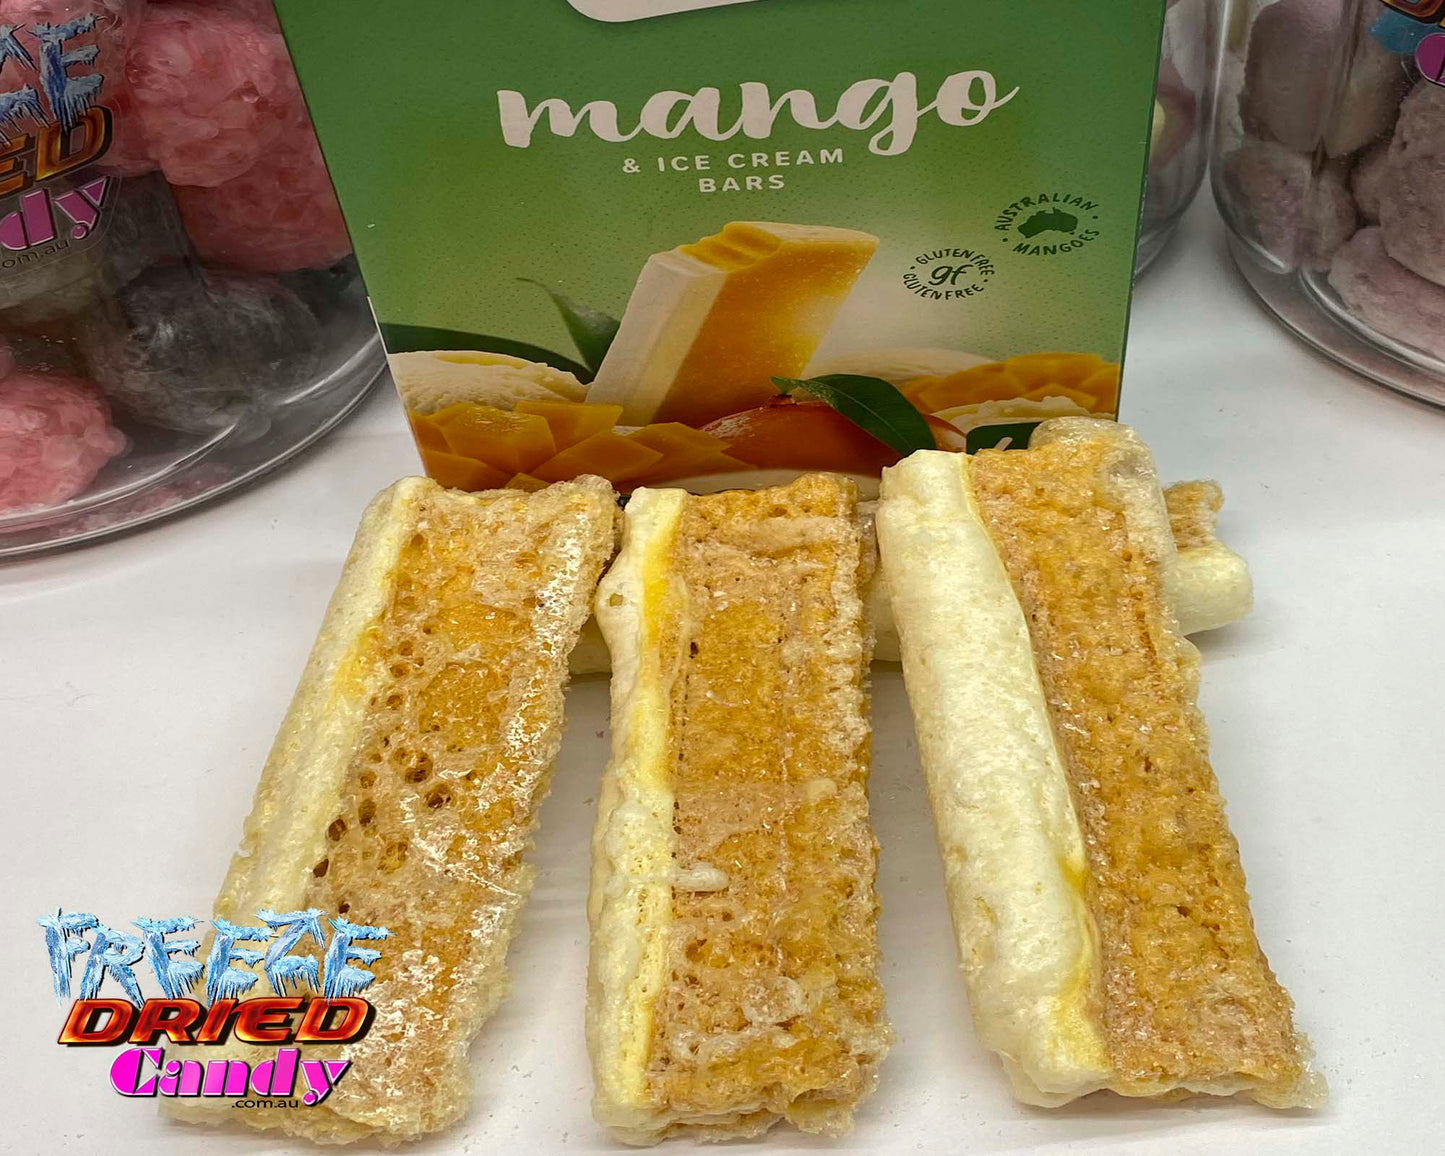 Freeze Dried Ice Cream WEIS® Bar - Mango Weis Mango bar is so unique, authentic, and perfectly balanced by a layer of traditional Weis ice cream. One bite and you're sure to be delighted. Fruit and cream are soulmates. Put them together with delicious natural ingredients, and you’ve got heaven in a Weis Bar. The two-toned Classic Weis Bars, a moreish combination of real fruit and their traditional cream strip, are an irresistible indulgence.